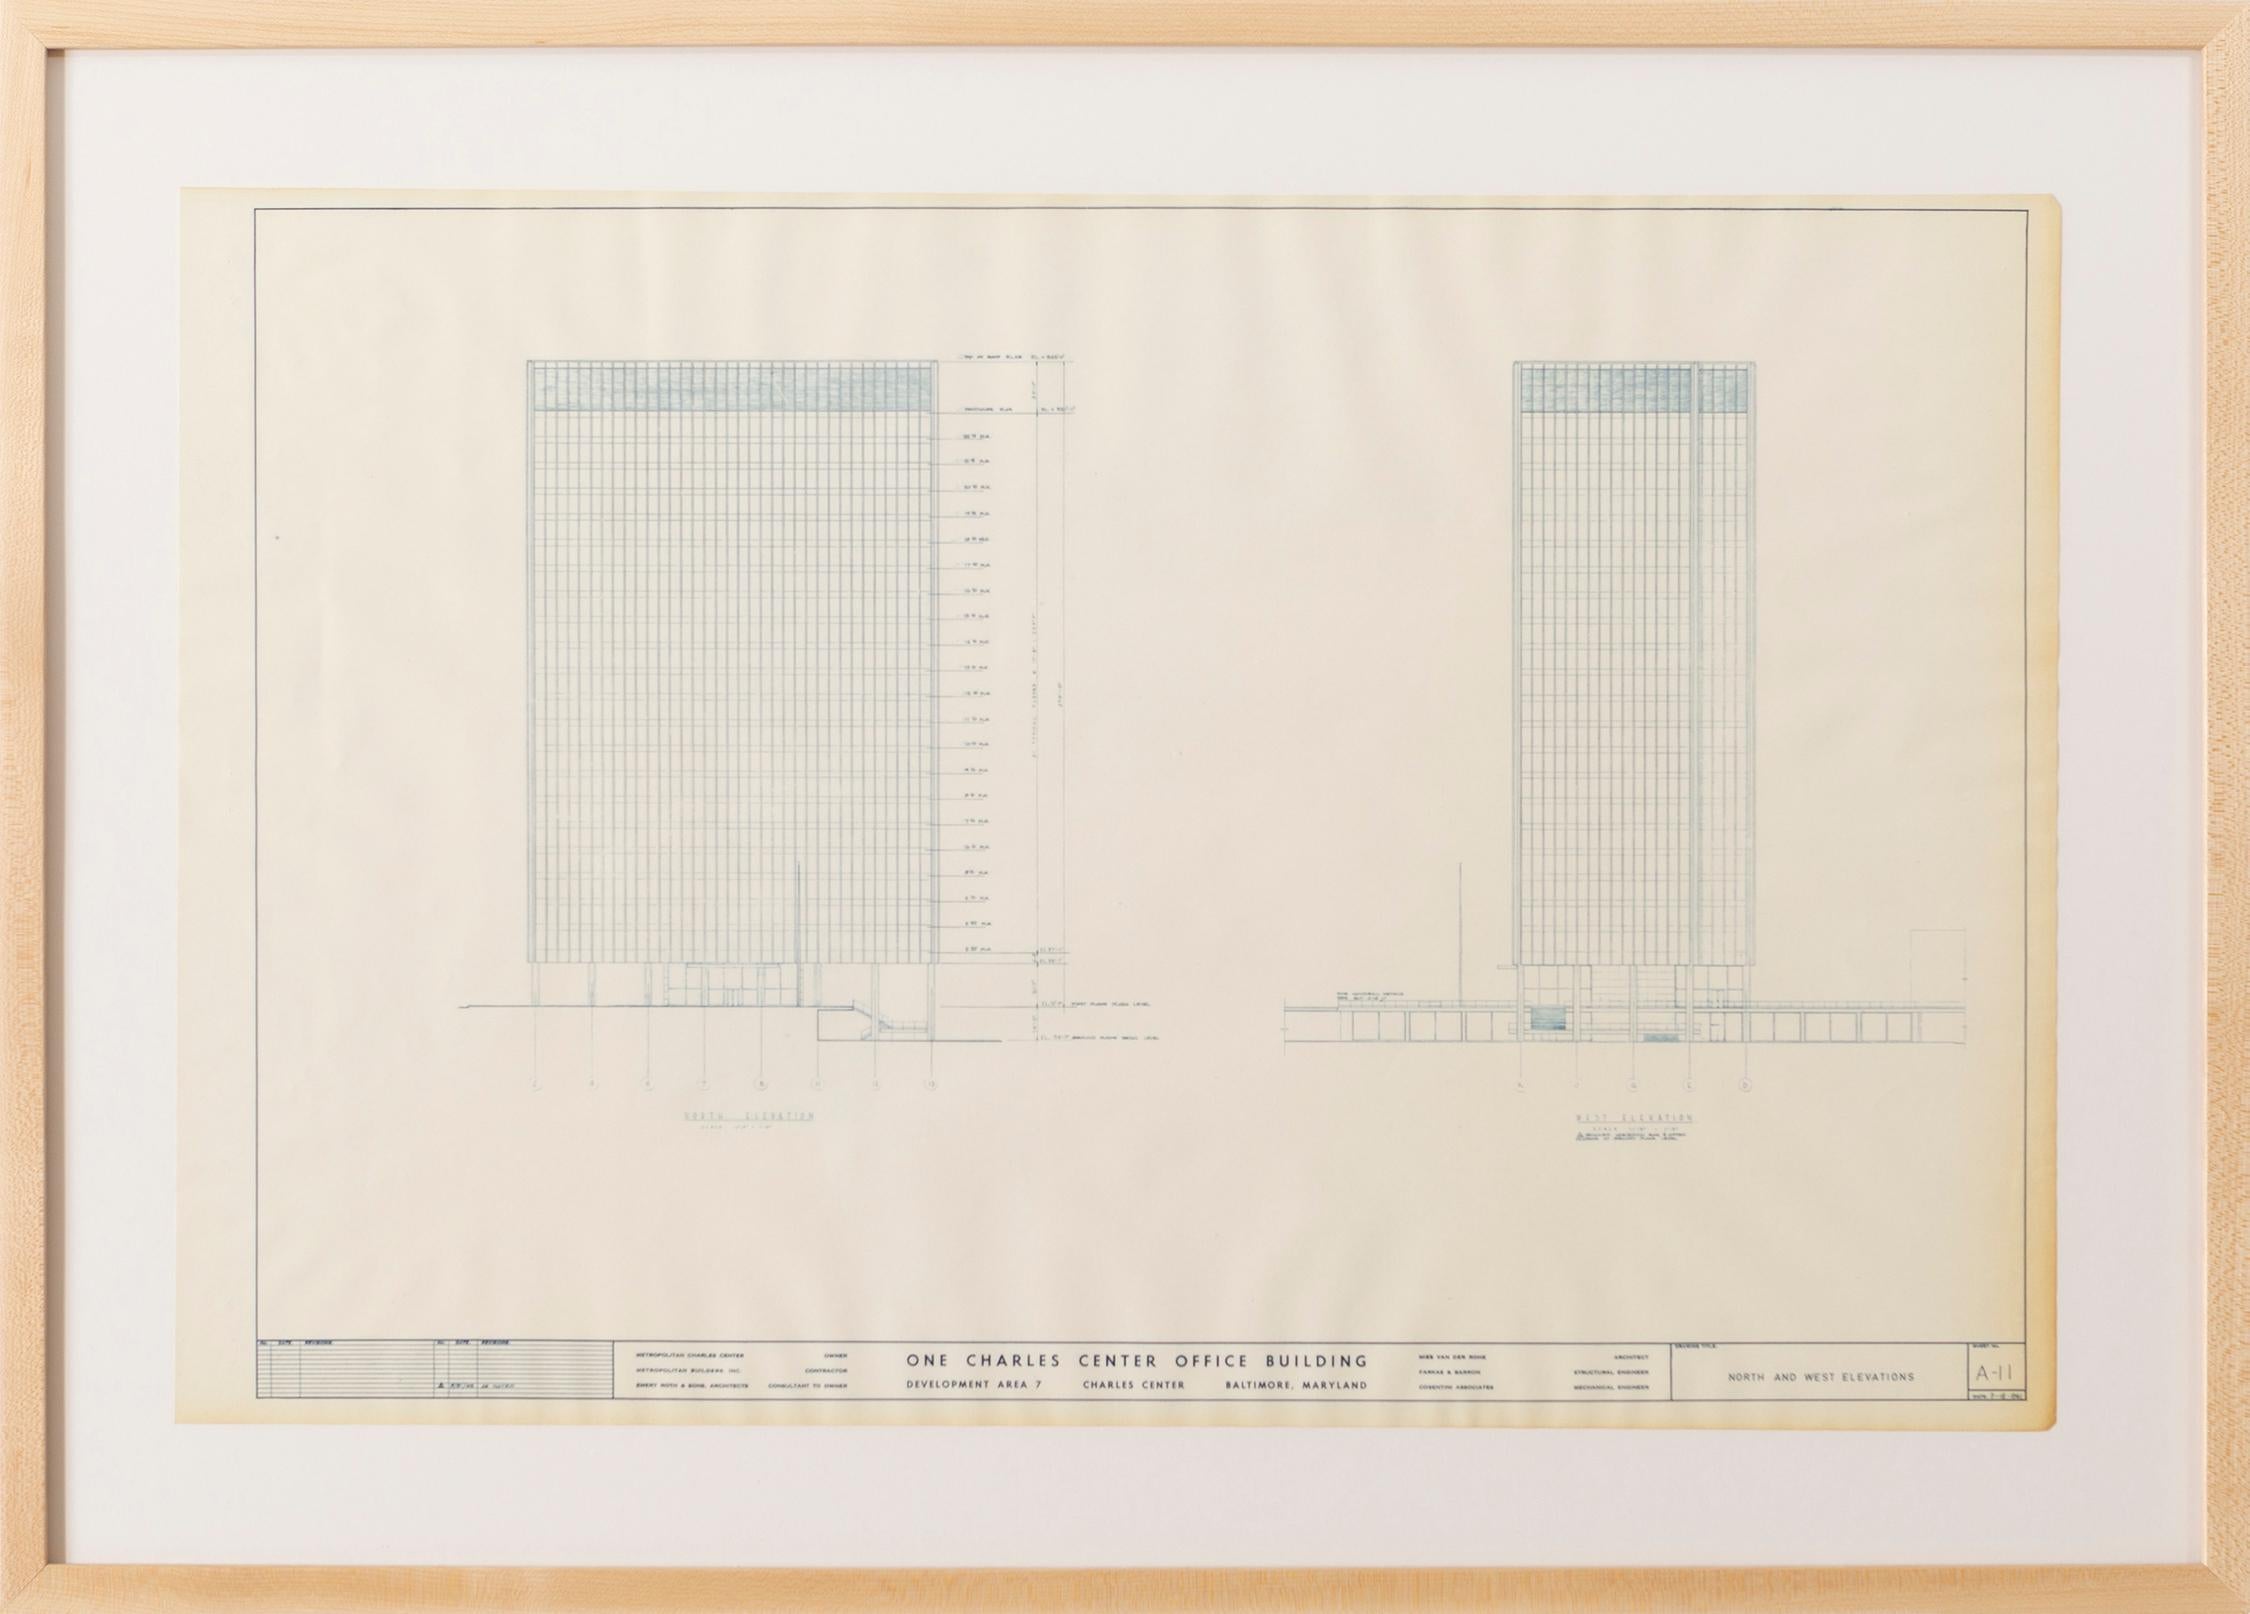 Blueprint from the office of Ludwig Mies van der Rohe, Chicago 1961

One Charles Center Office Building, Baltimore, MD

Drawing A-11: North and West Elevations

Ludwig Mies van der Rohe

This is one of a collection of prints offered for sale